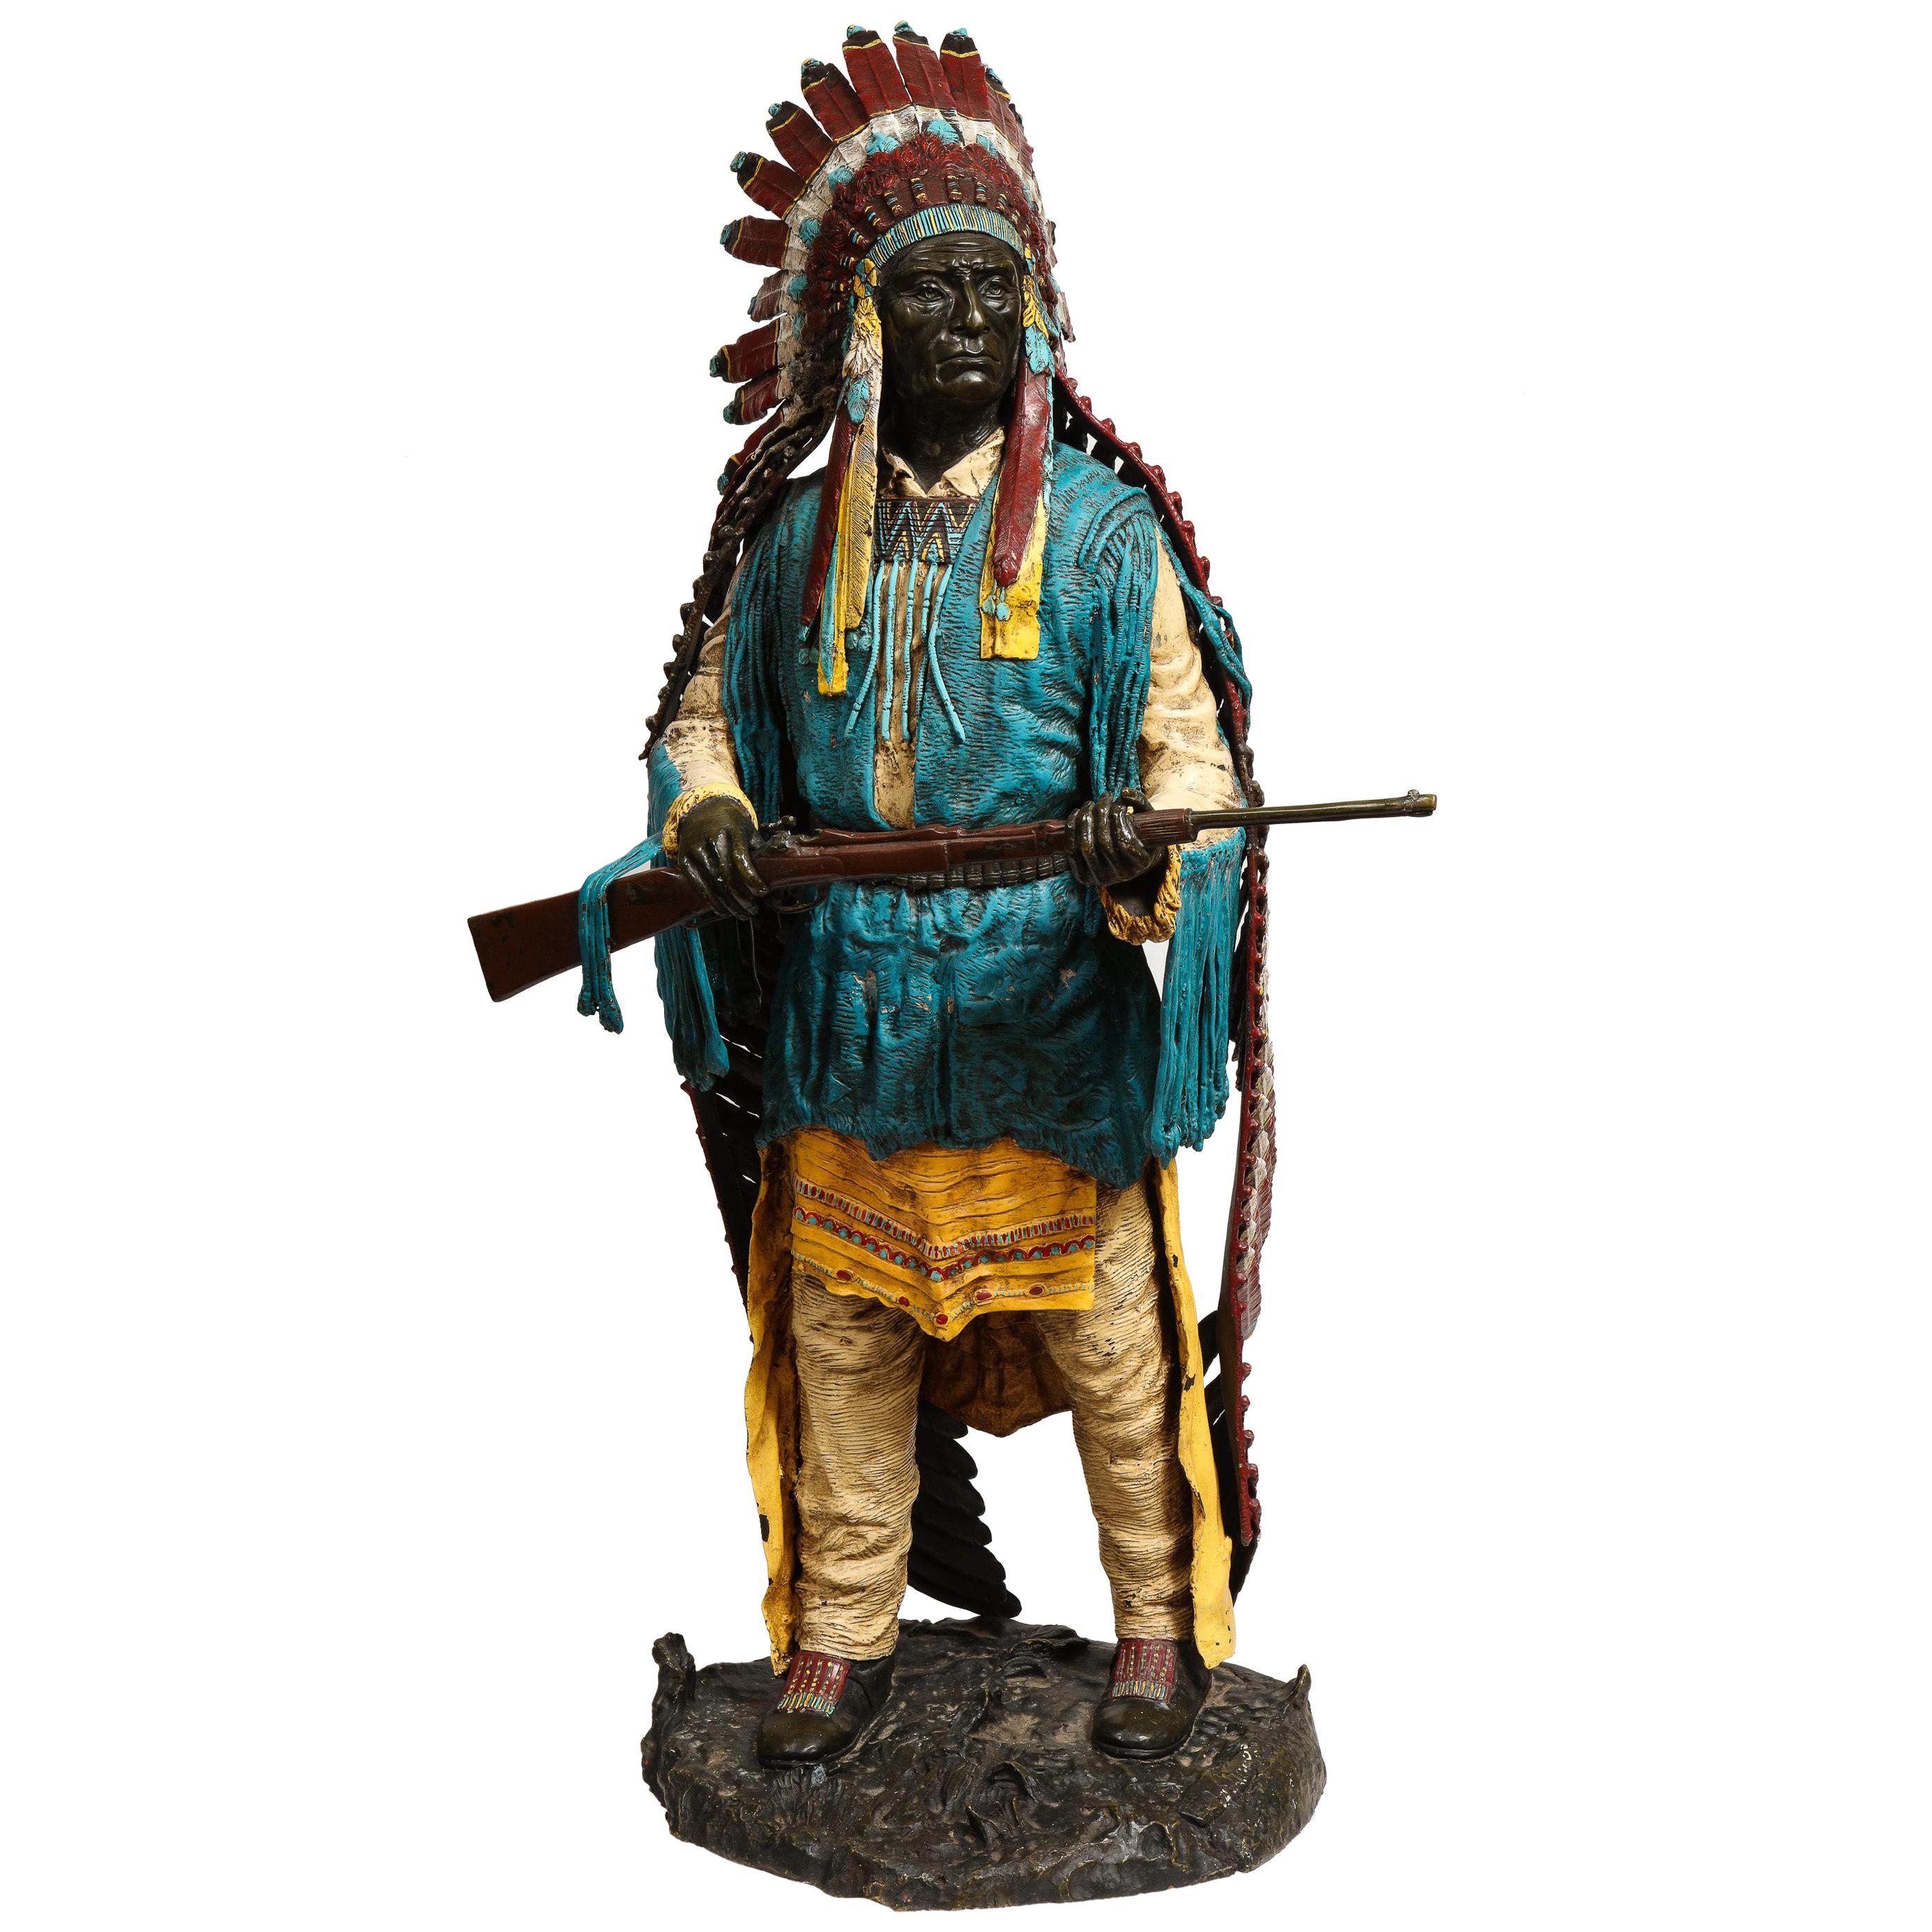 Near Life-Size Polychrome Bronze of a Native American Indian Chief After Kauba